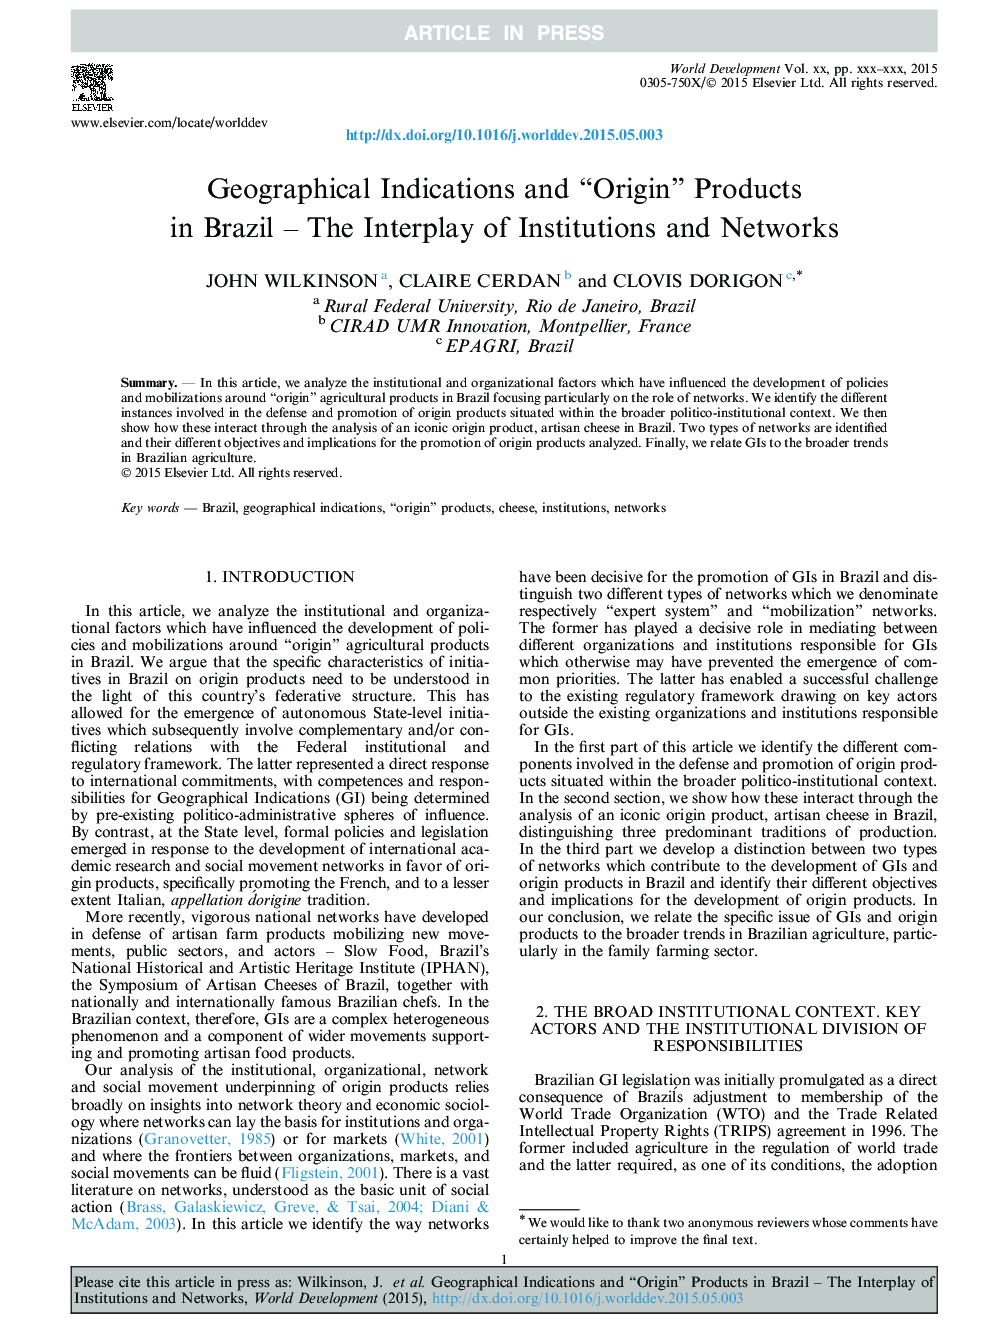 Geographical Indications and “Origin” Products in Brazil - The Interplay of Institutions and Networks